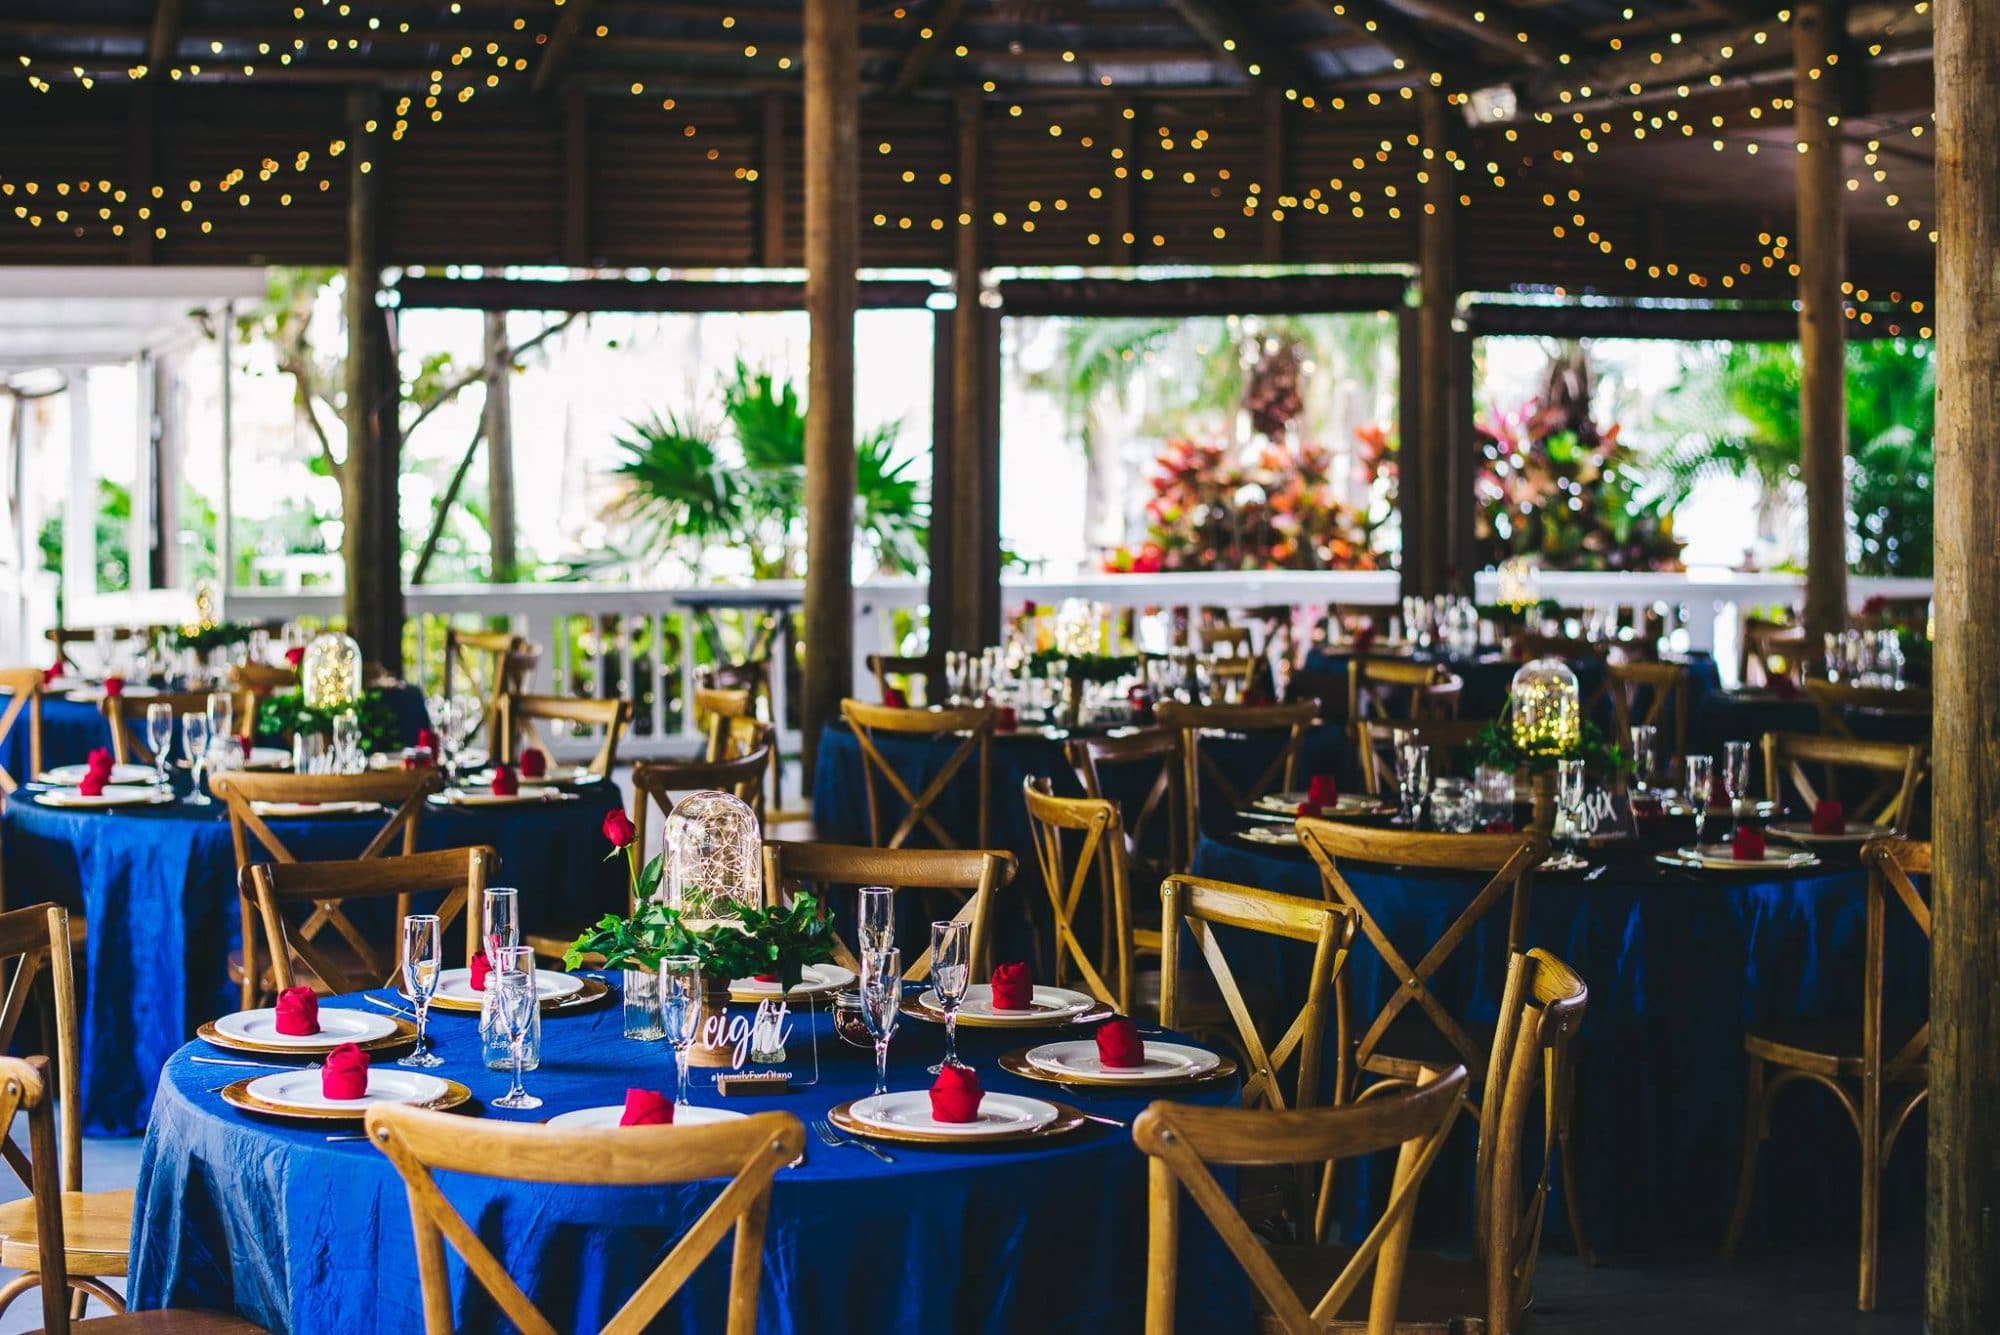 Paradise Cove - laidback reception set up under cool, tropical patio